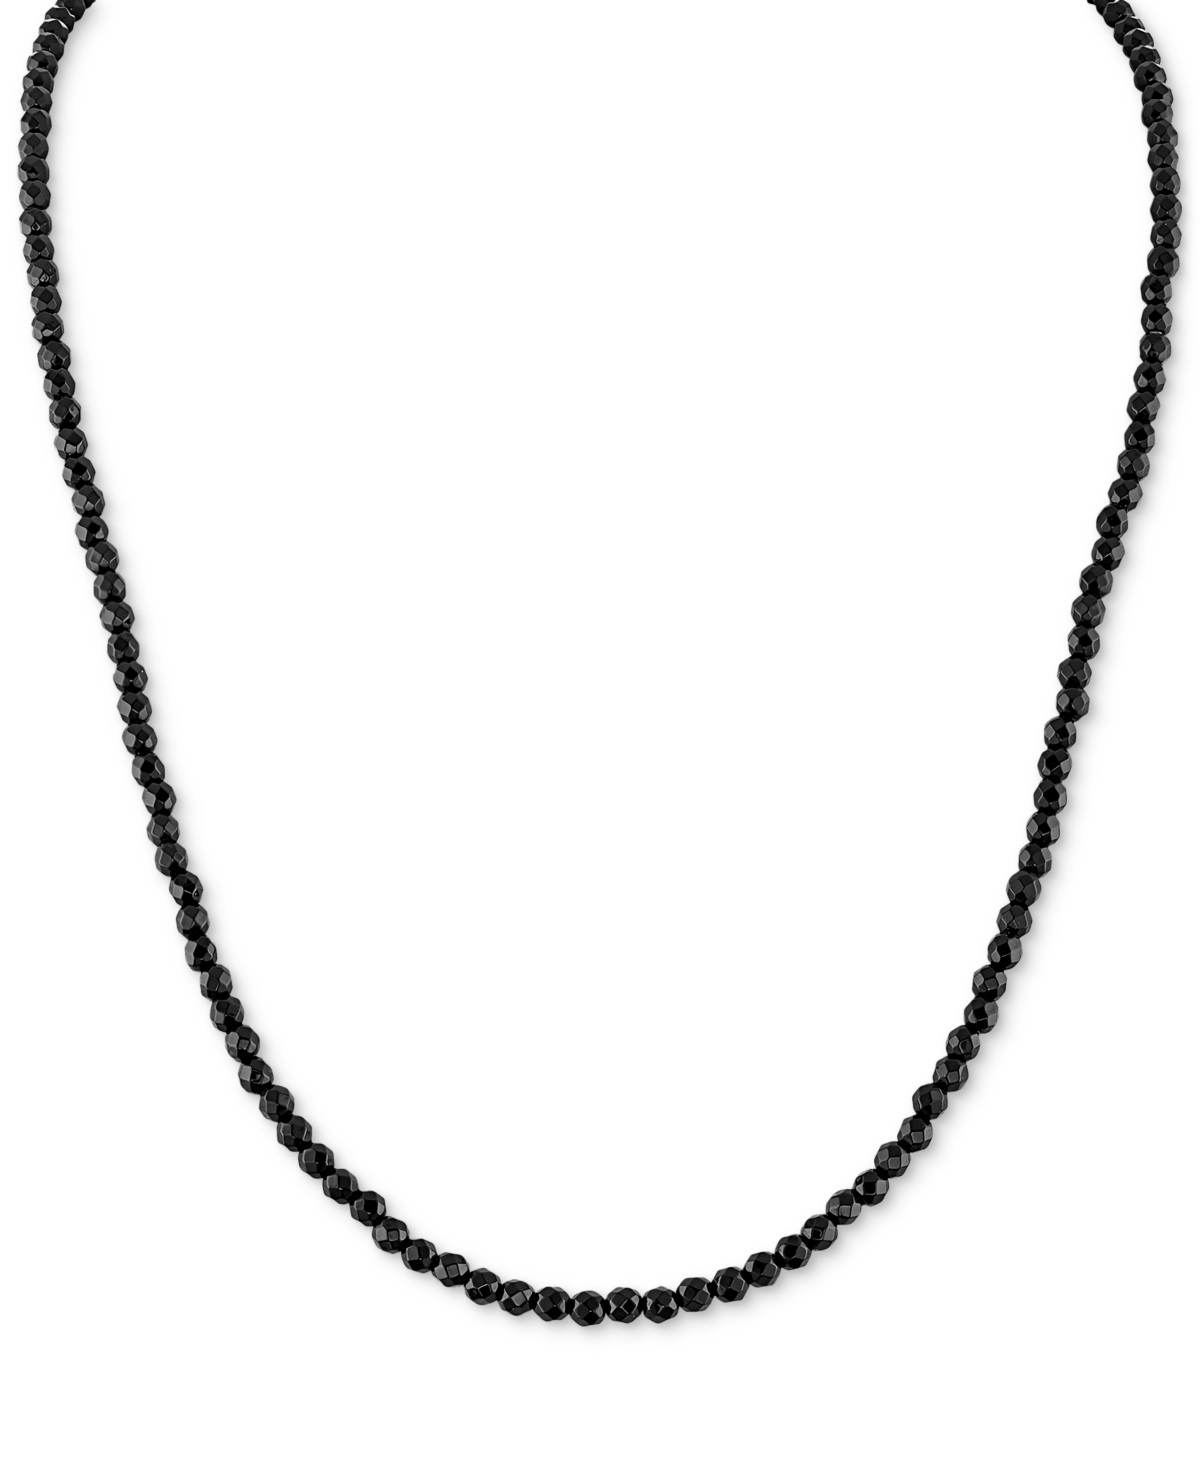 Black Spinel Beaded 22" Statement Necklace in Sterling Silver, Created for Macy's - Black